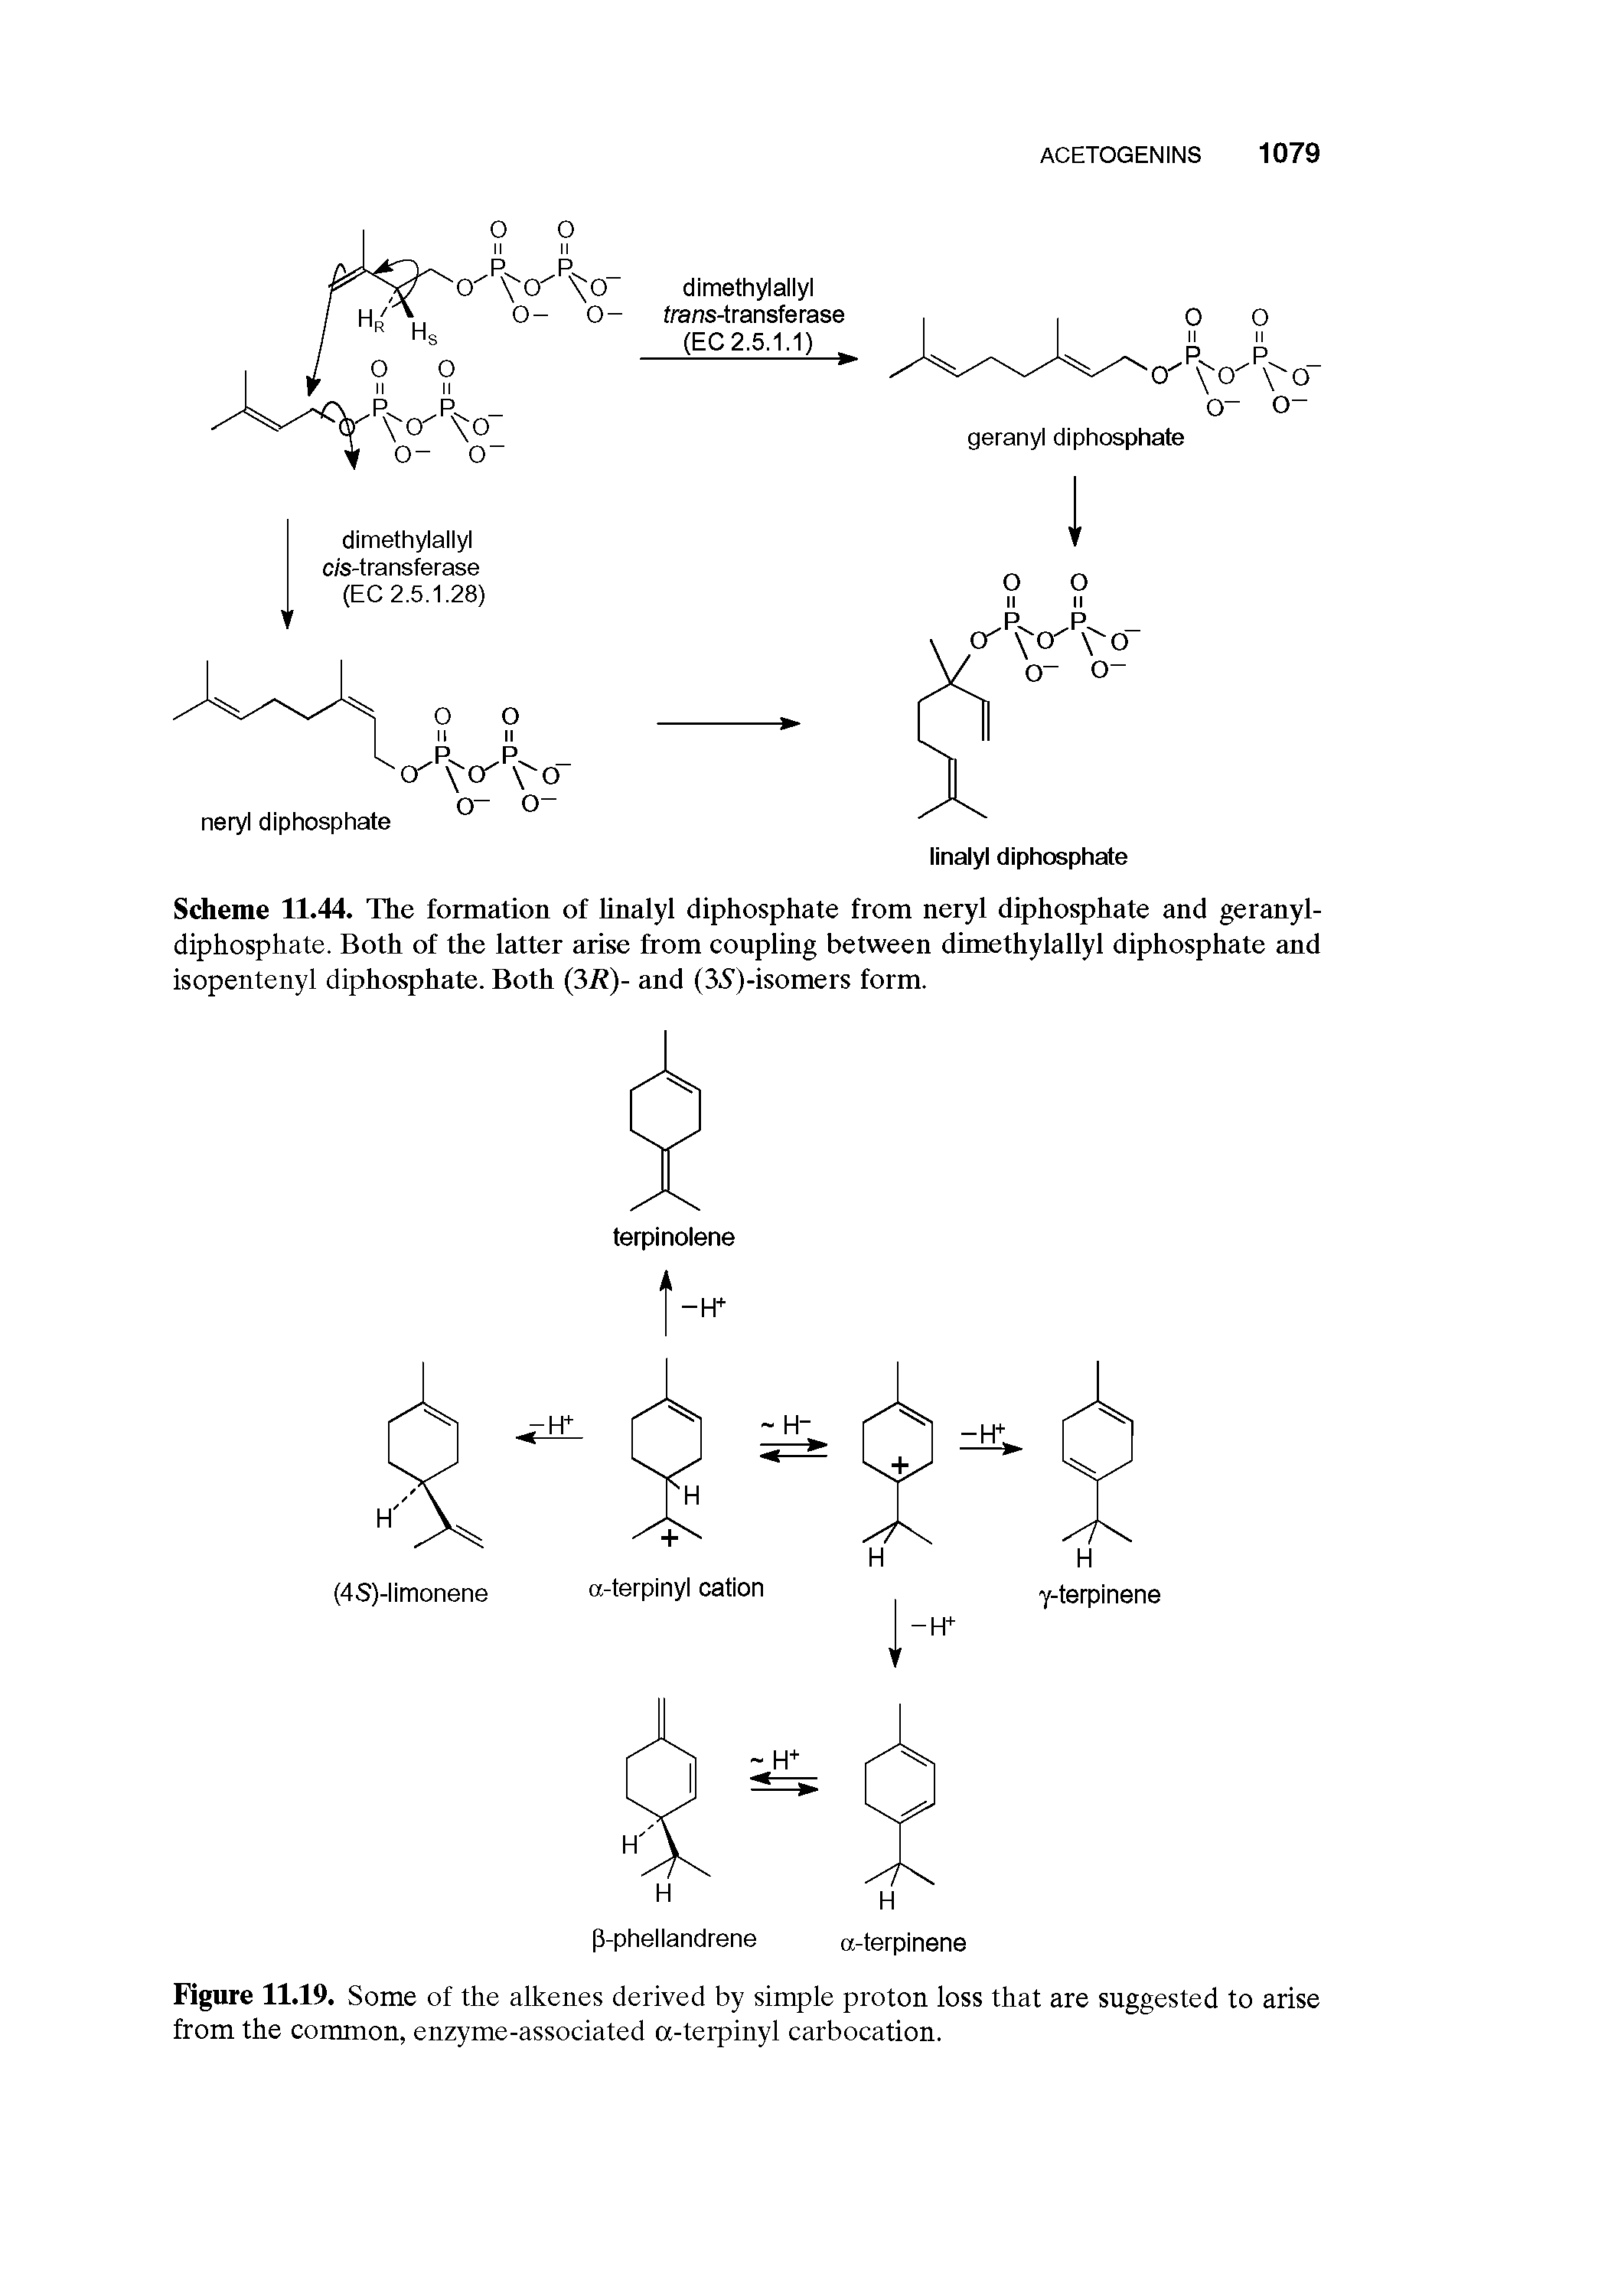 Scheme 11.44. The formation of linalyl diphosphate from neryl diphosphate and geranyl-diphosphate. Both of the latter arise from coupling between dimethylallyl diphosphate and isopentenyl diphosphate. Both (31 )- and (35)-isomers form.